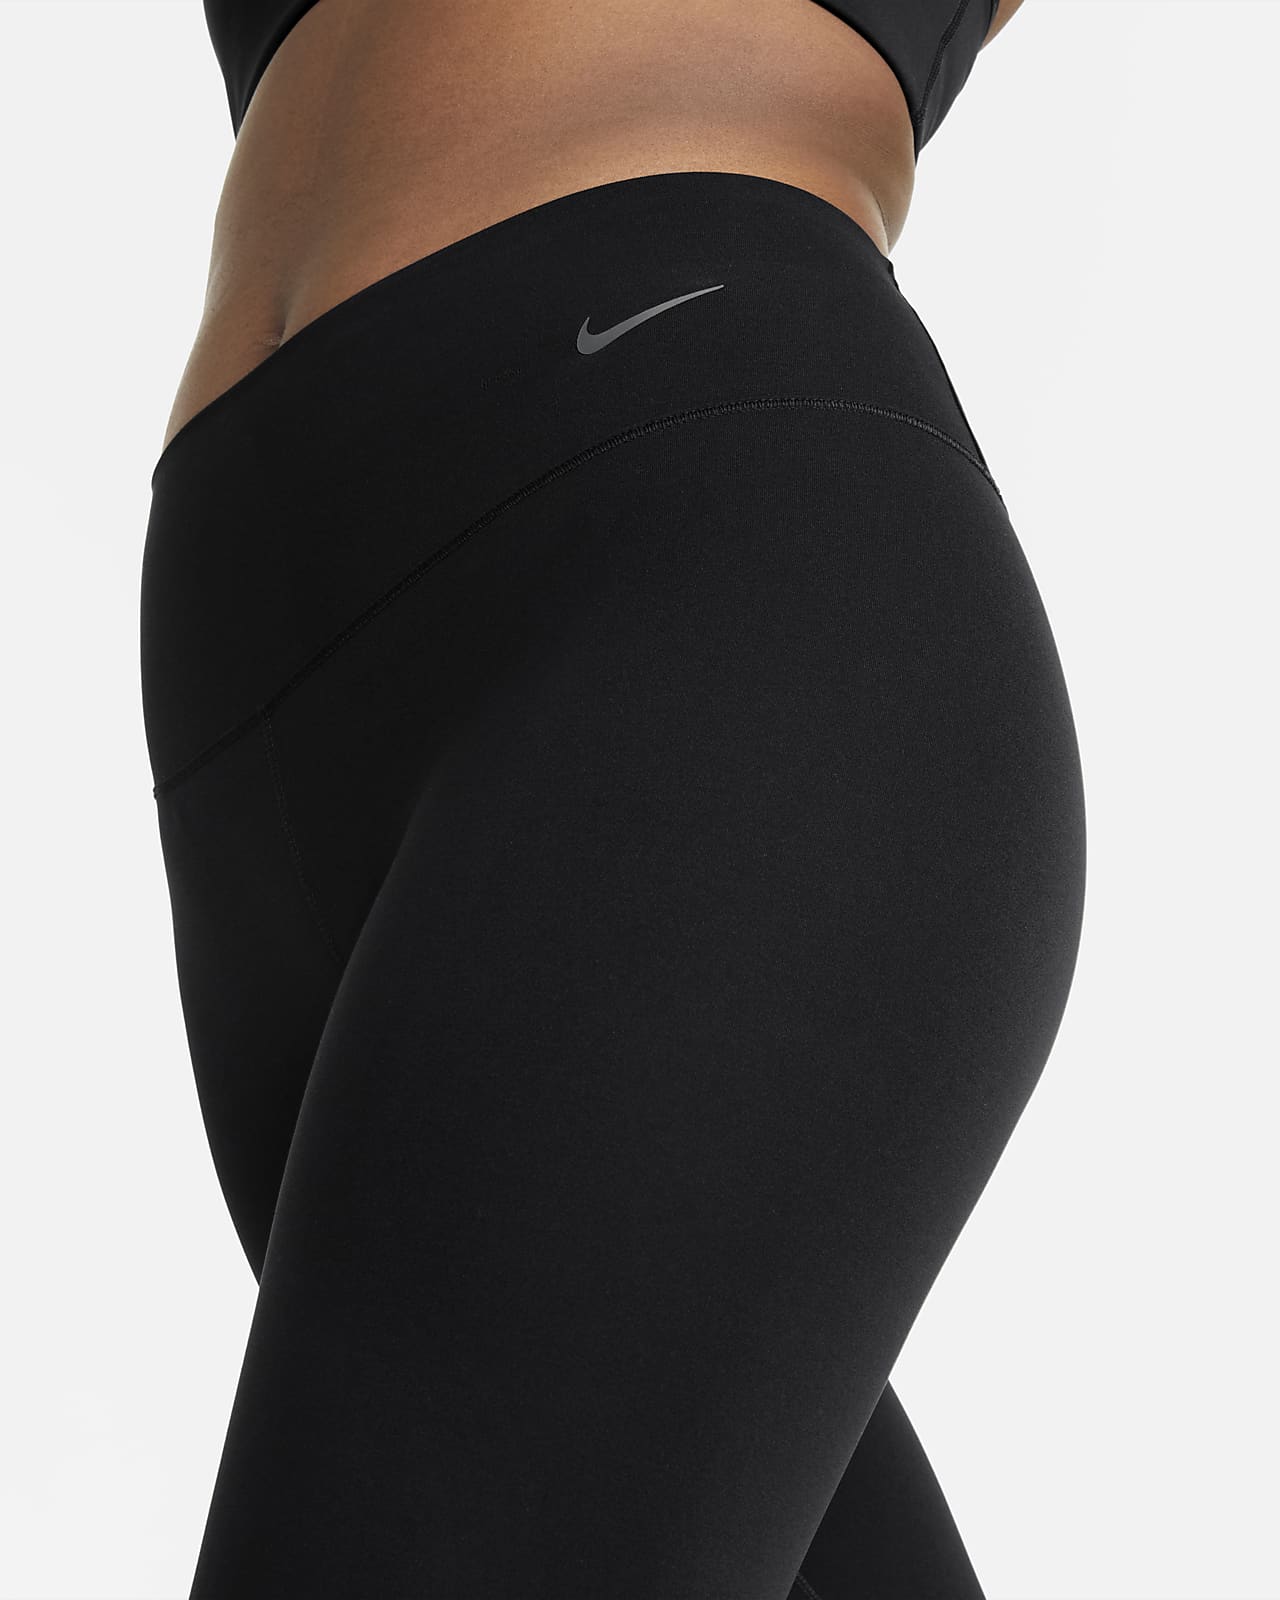 NIKE Pro Tights Navy - Unisex Adult Bottoms, Items 